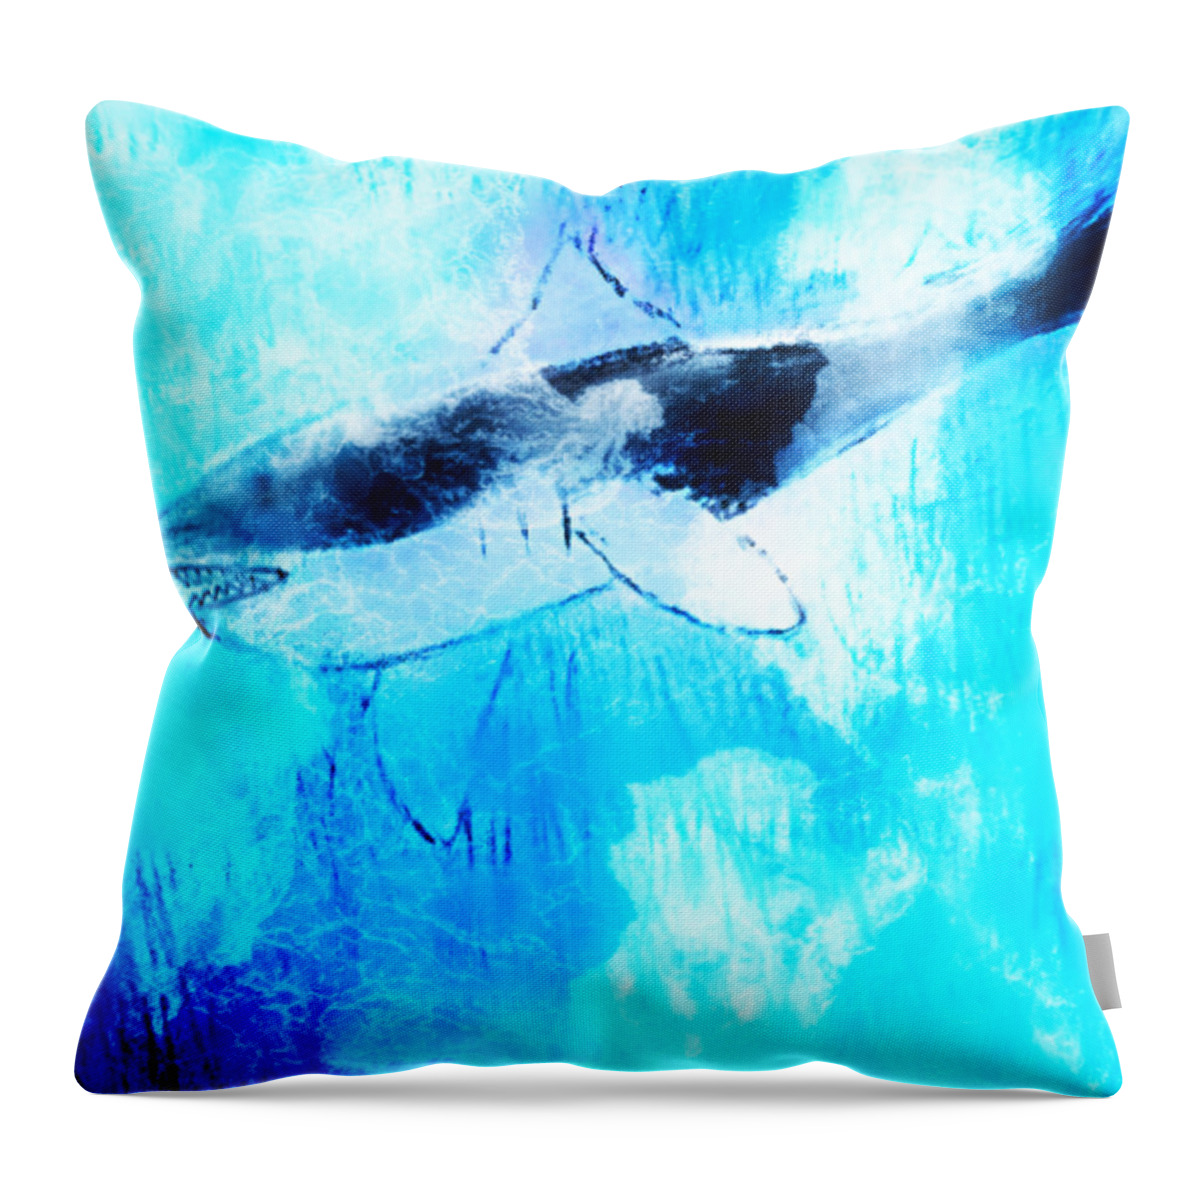 Whale Throw Pillow featuring the drawing Whale Art by Anna Adams